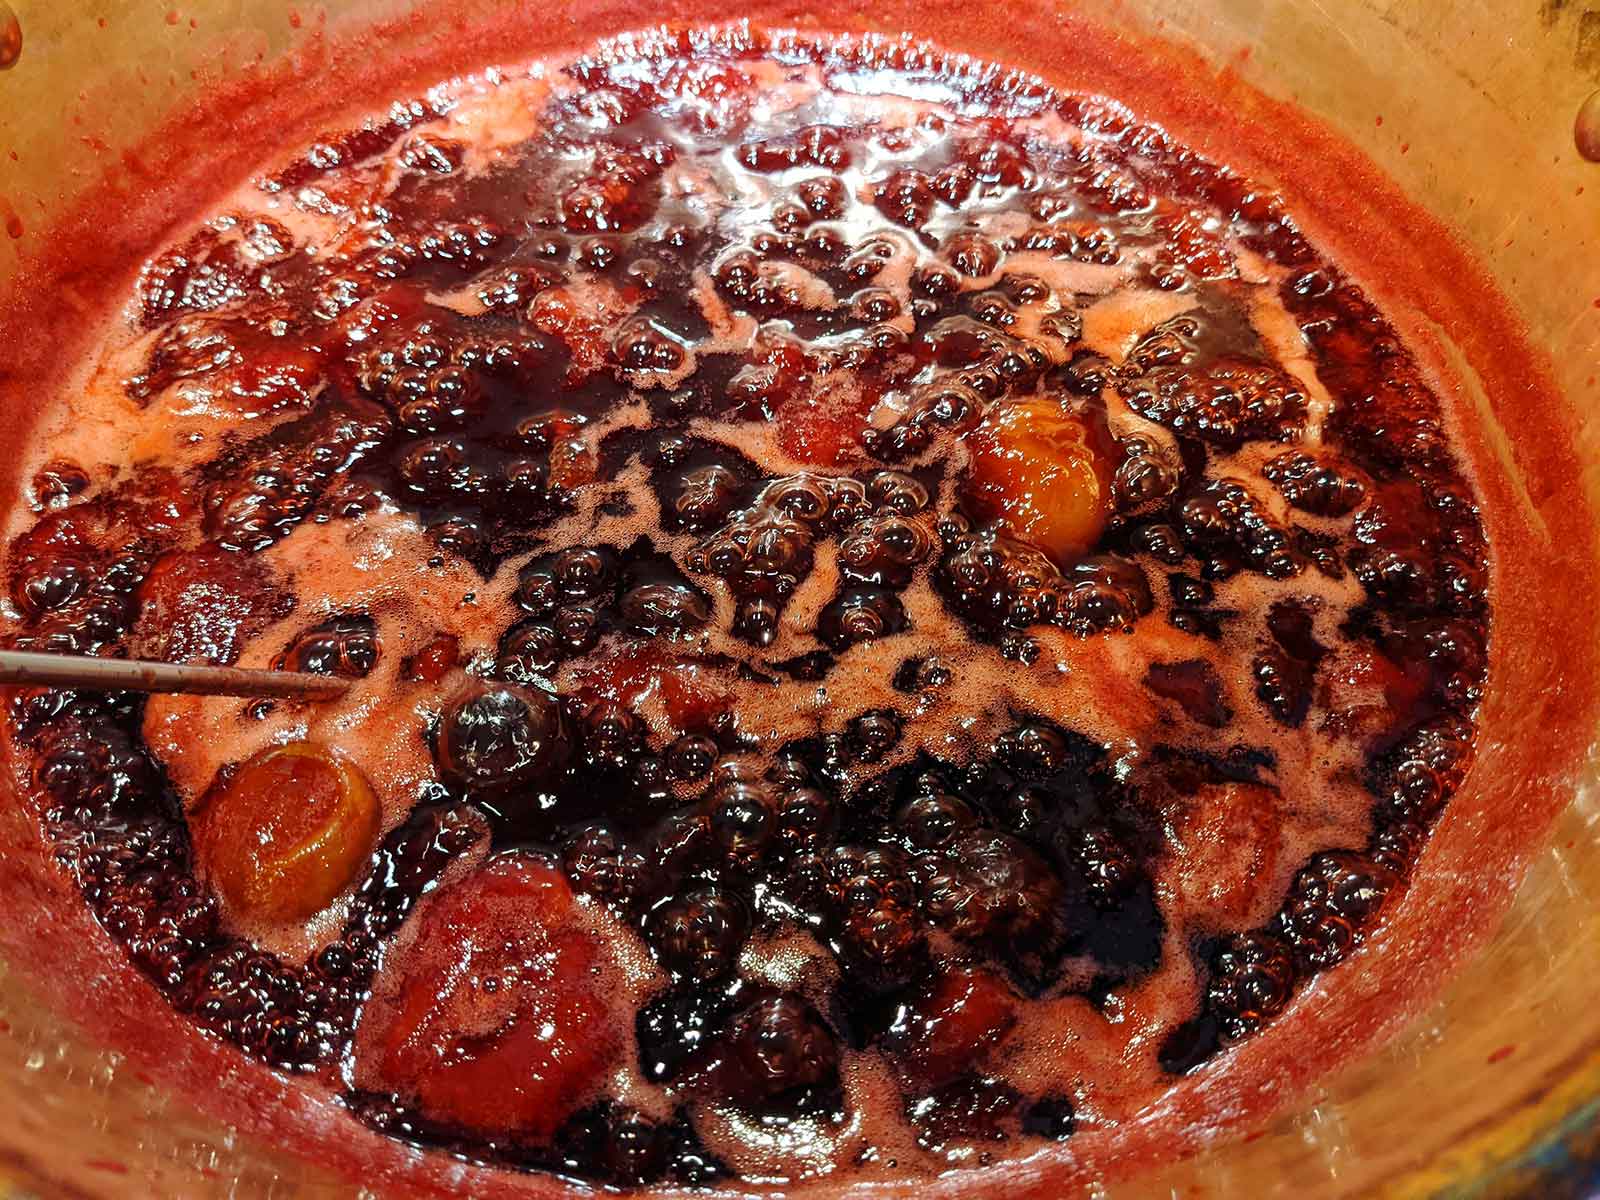 Plums cooking in a Copper Pan